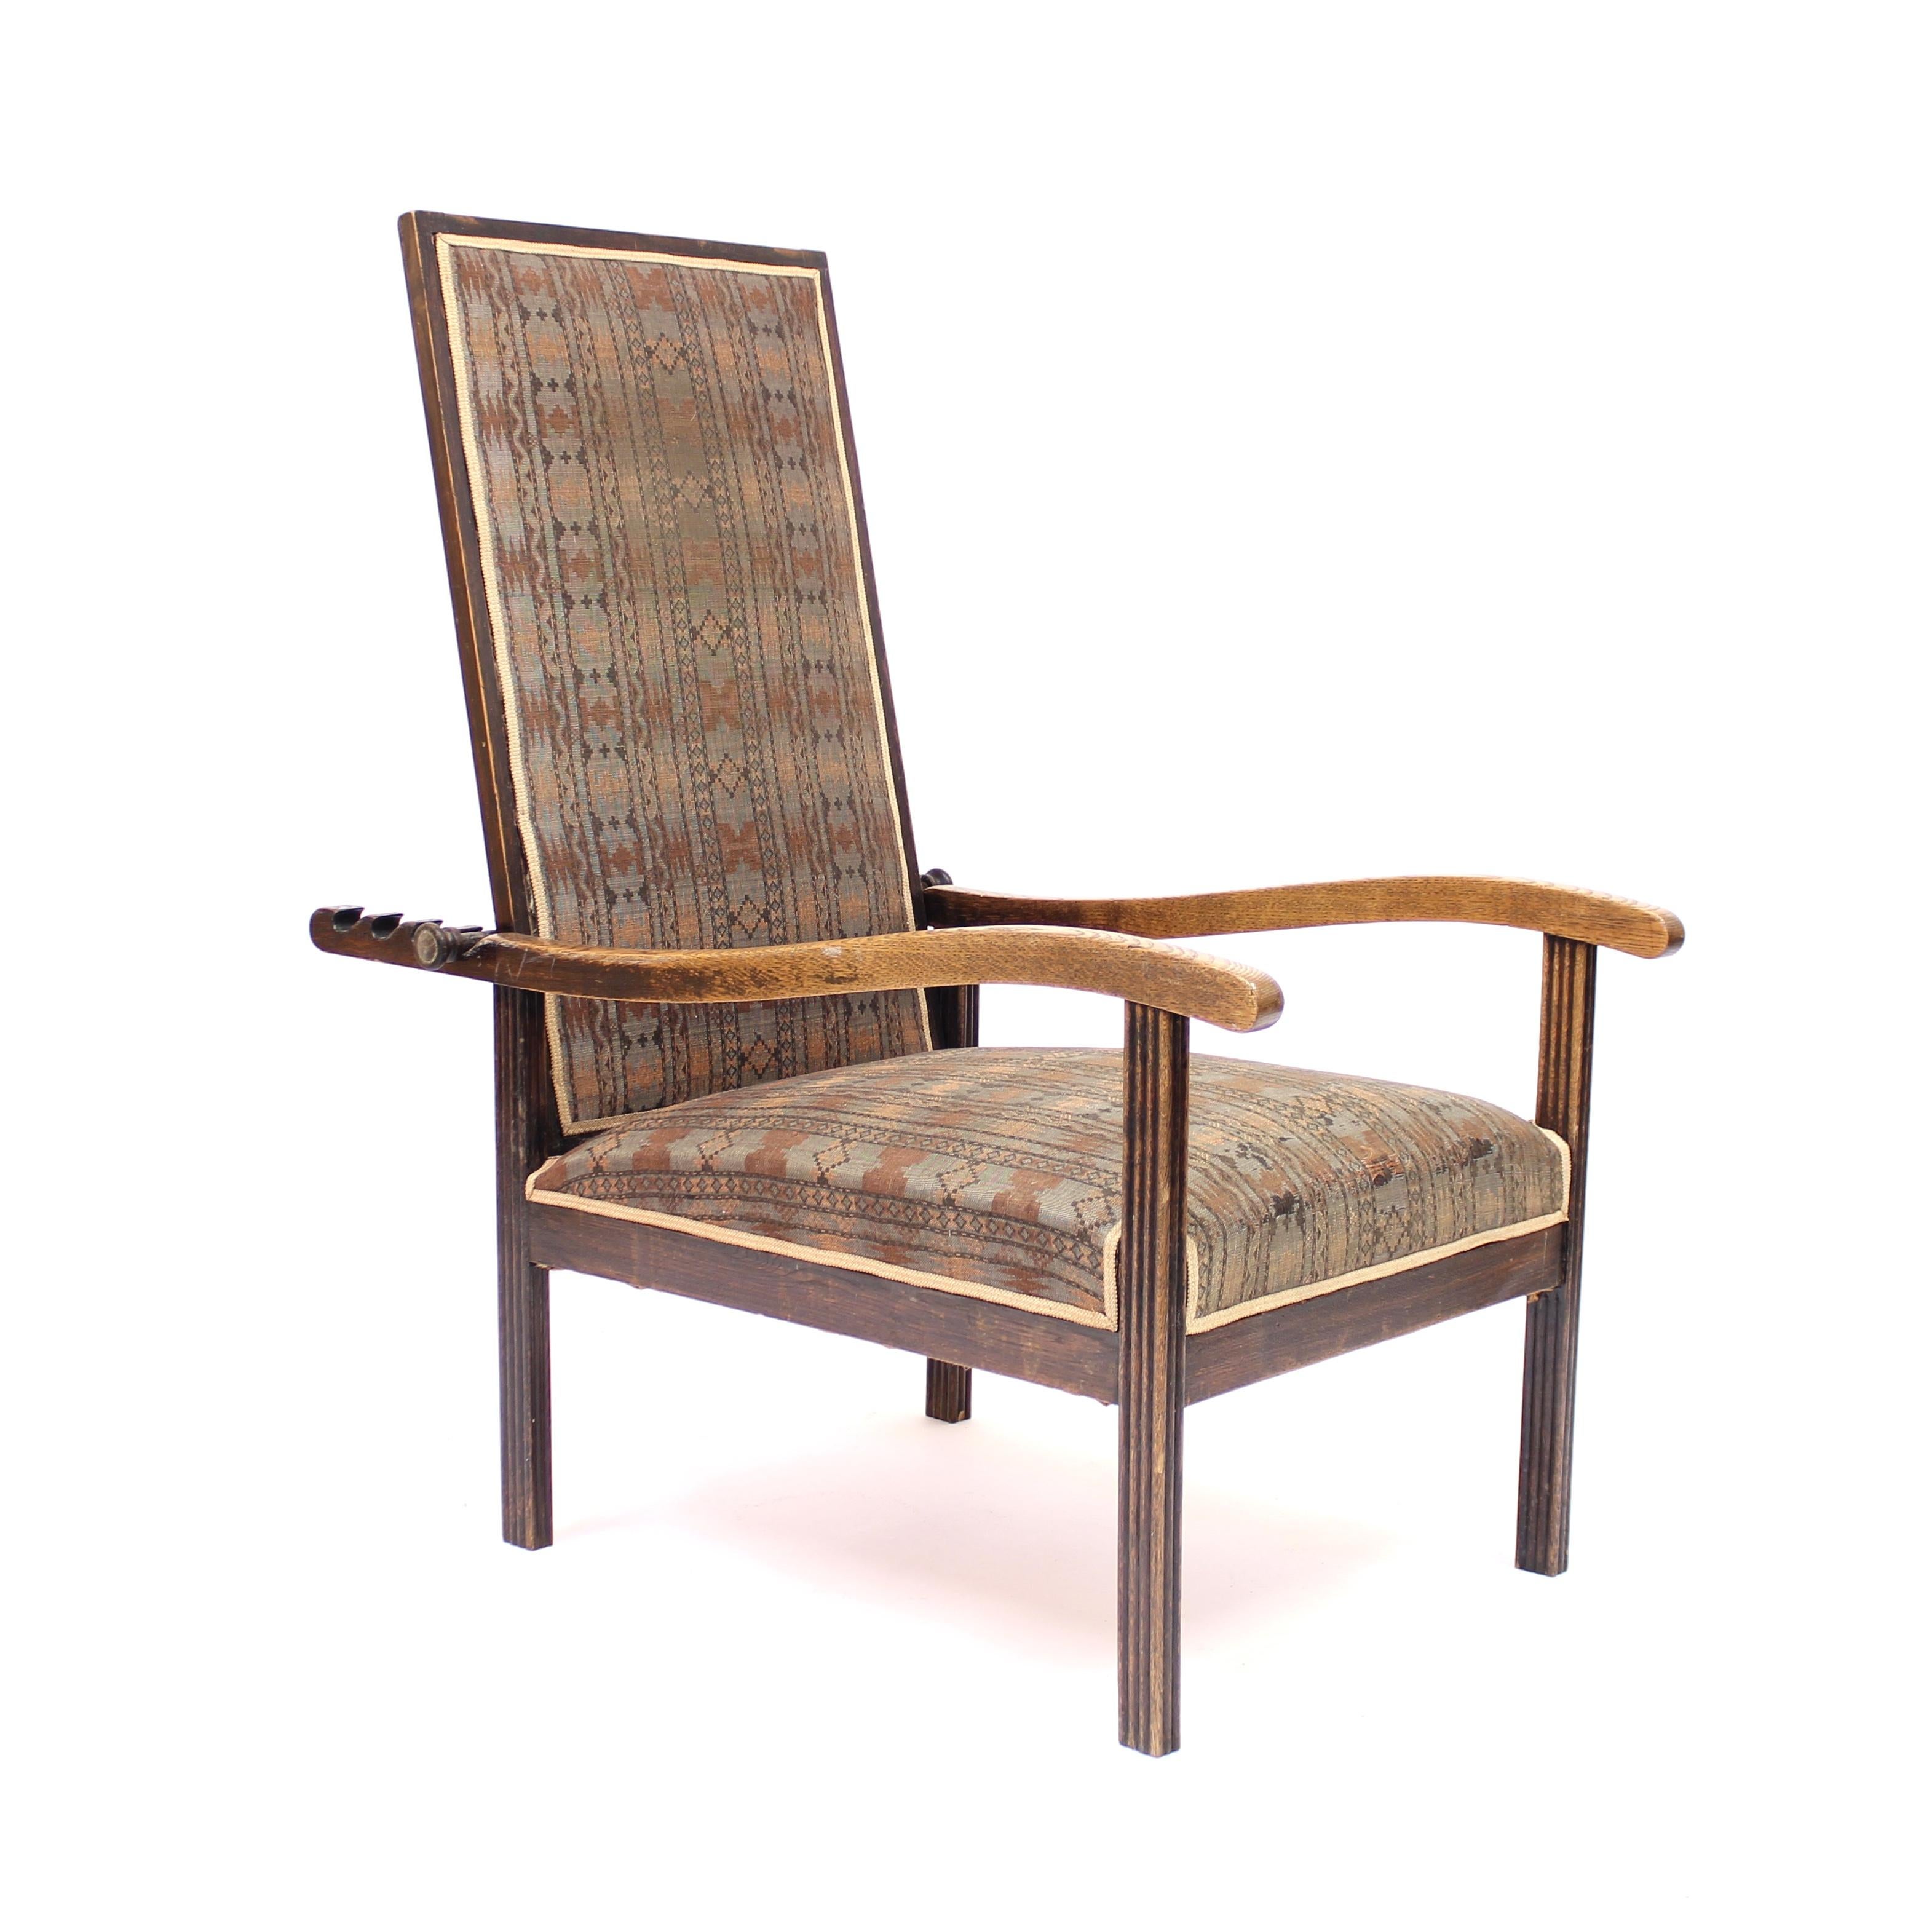 Arts and Crafts Fauteuil inclinable en chne Arts & Crafts ancien, dbut du XXe sicle en vente